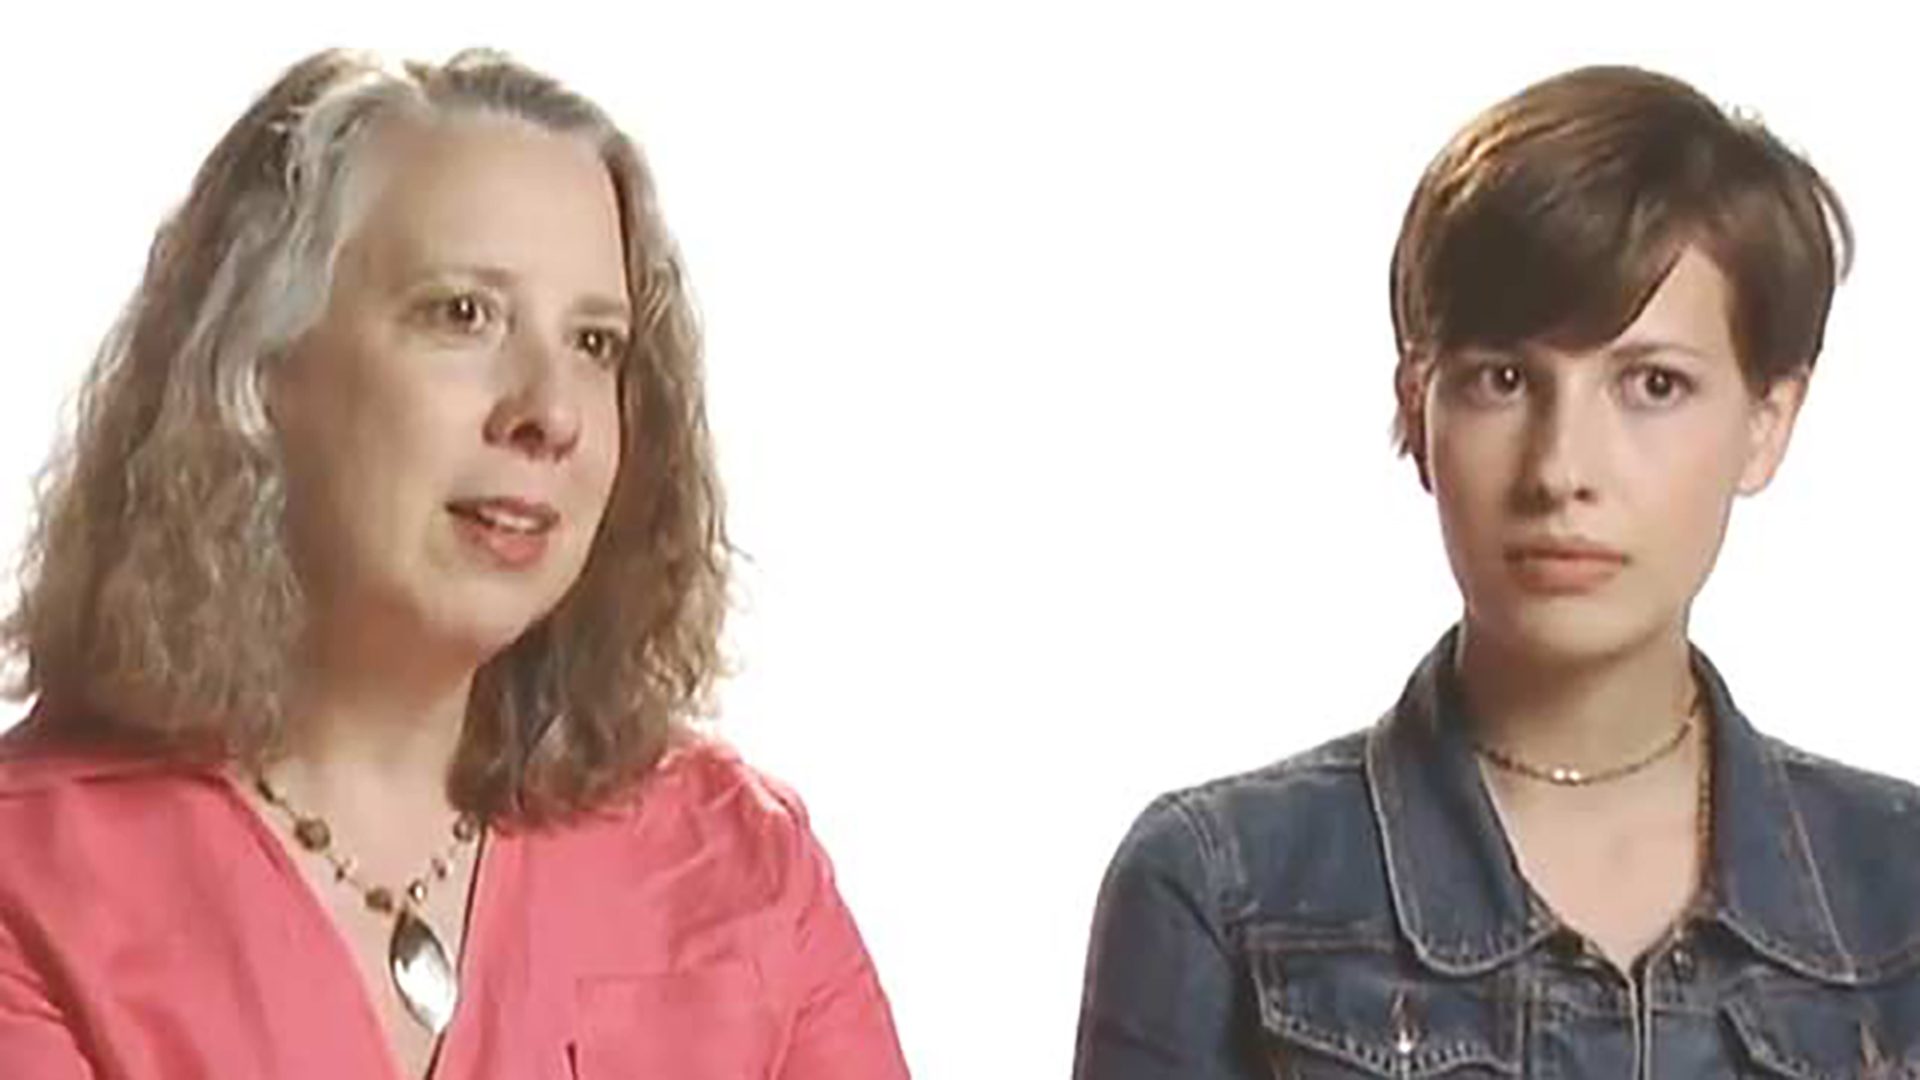 An adult woman wearing pink and a young adult woman with short hair wearing a denim jacket are interviewed together.